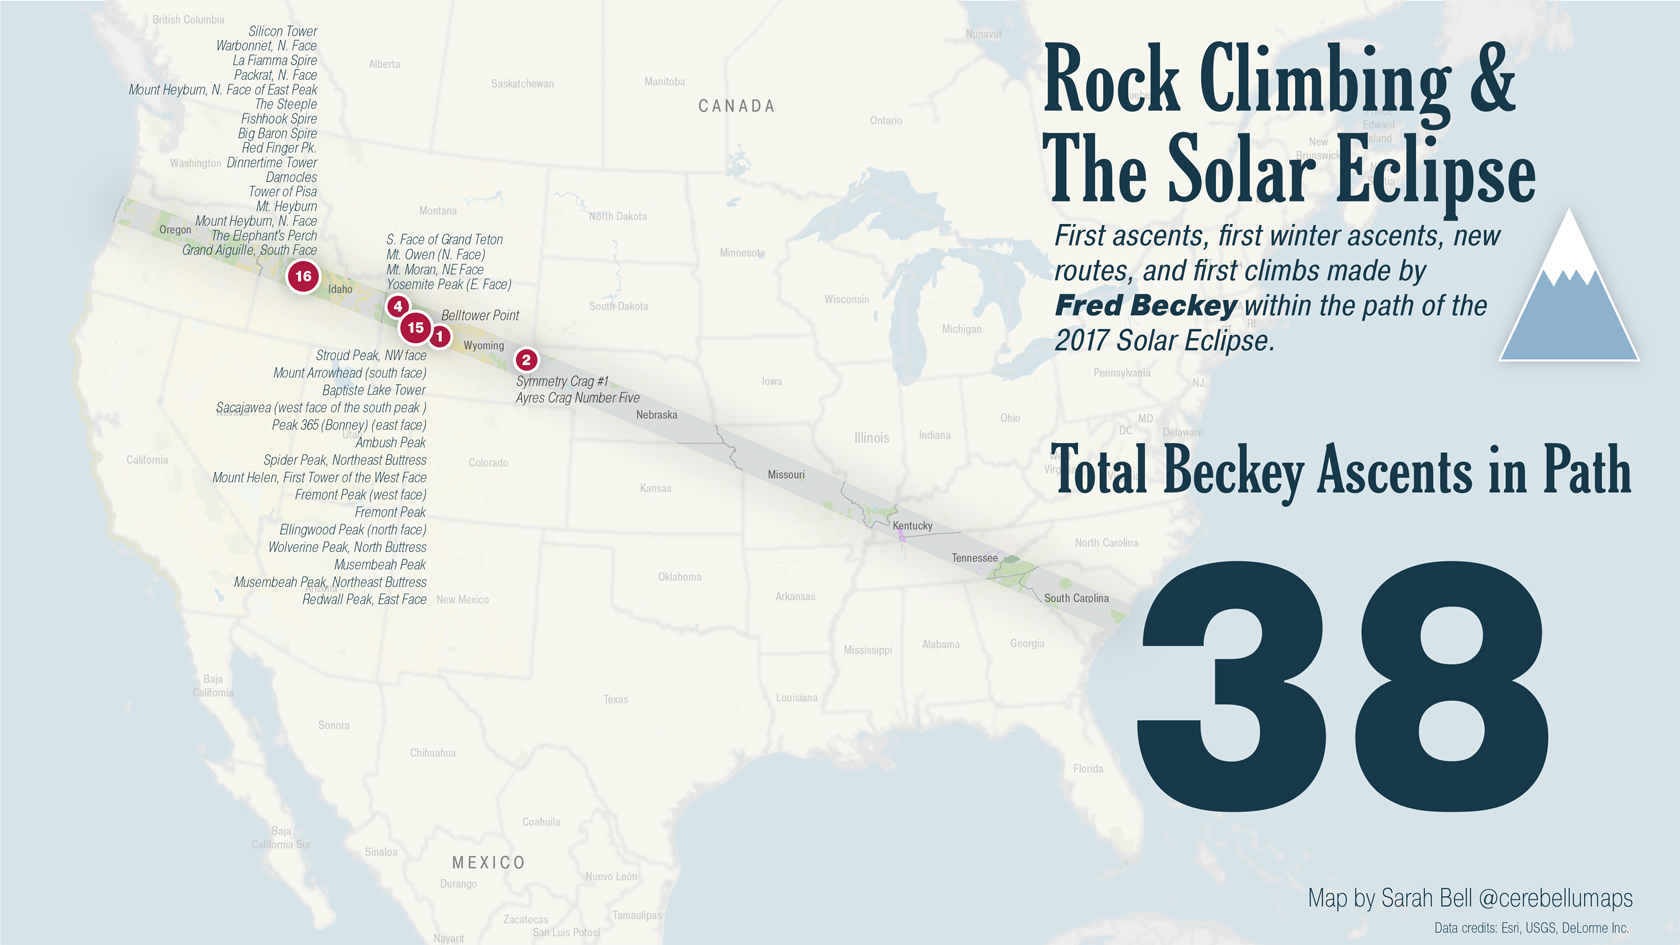 First ascents and first climbing routes by Fred Beckey in the path of the 2017 Solar Eclipse